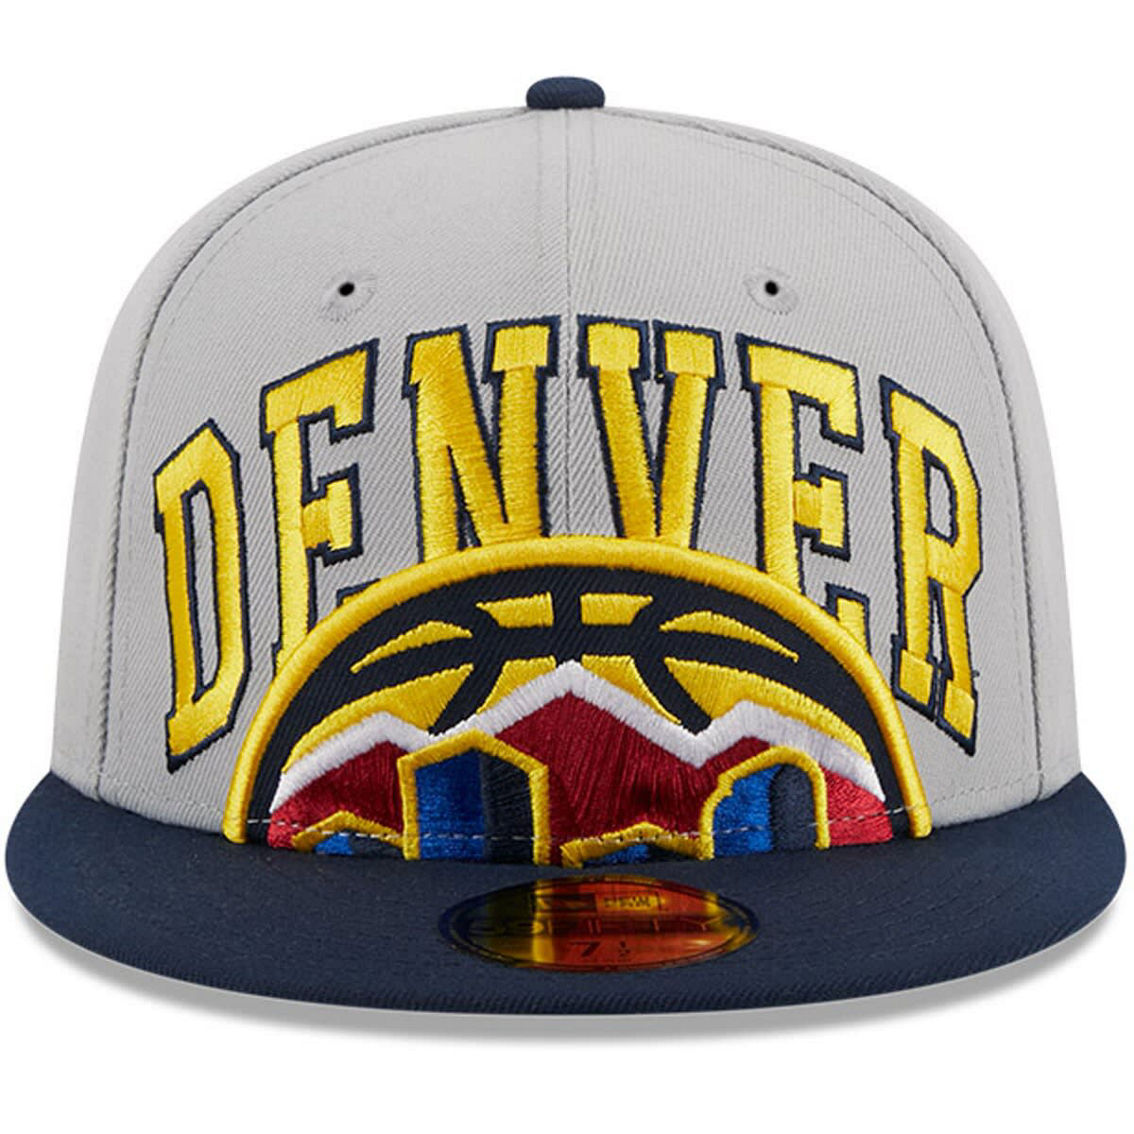 New Era Men's Gray/Navy Denver Nuggets Tip-Off Two-Tone 59FIFTY Fitted Hat - Image 3 of 4